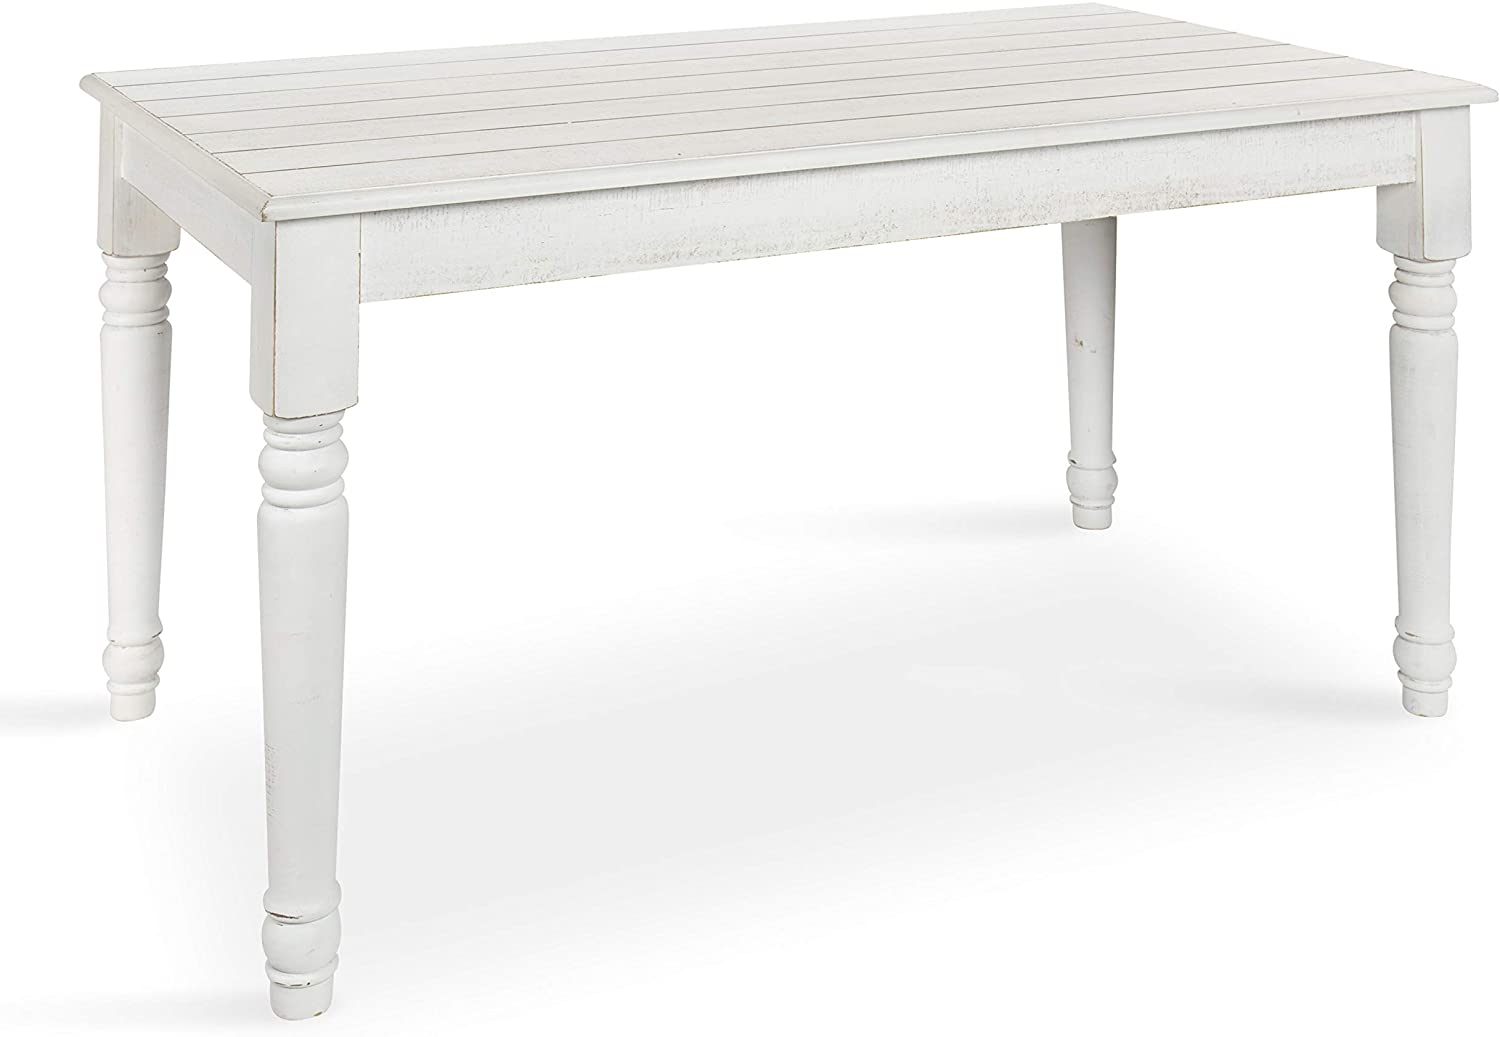 B07JN1ZCV1 Kate and Laurel Cates Rustic Farmhouse Barnboard Wood Desk/Dining Table, White